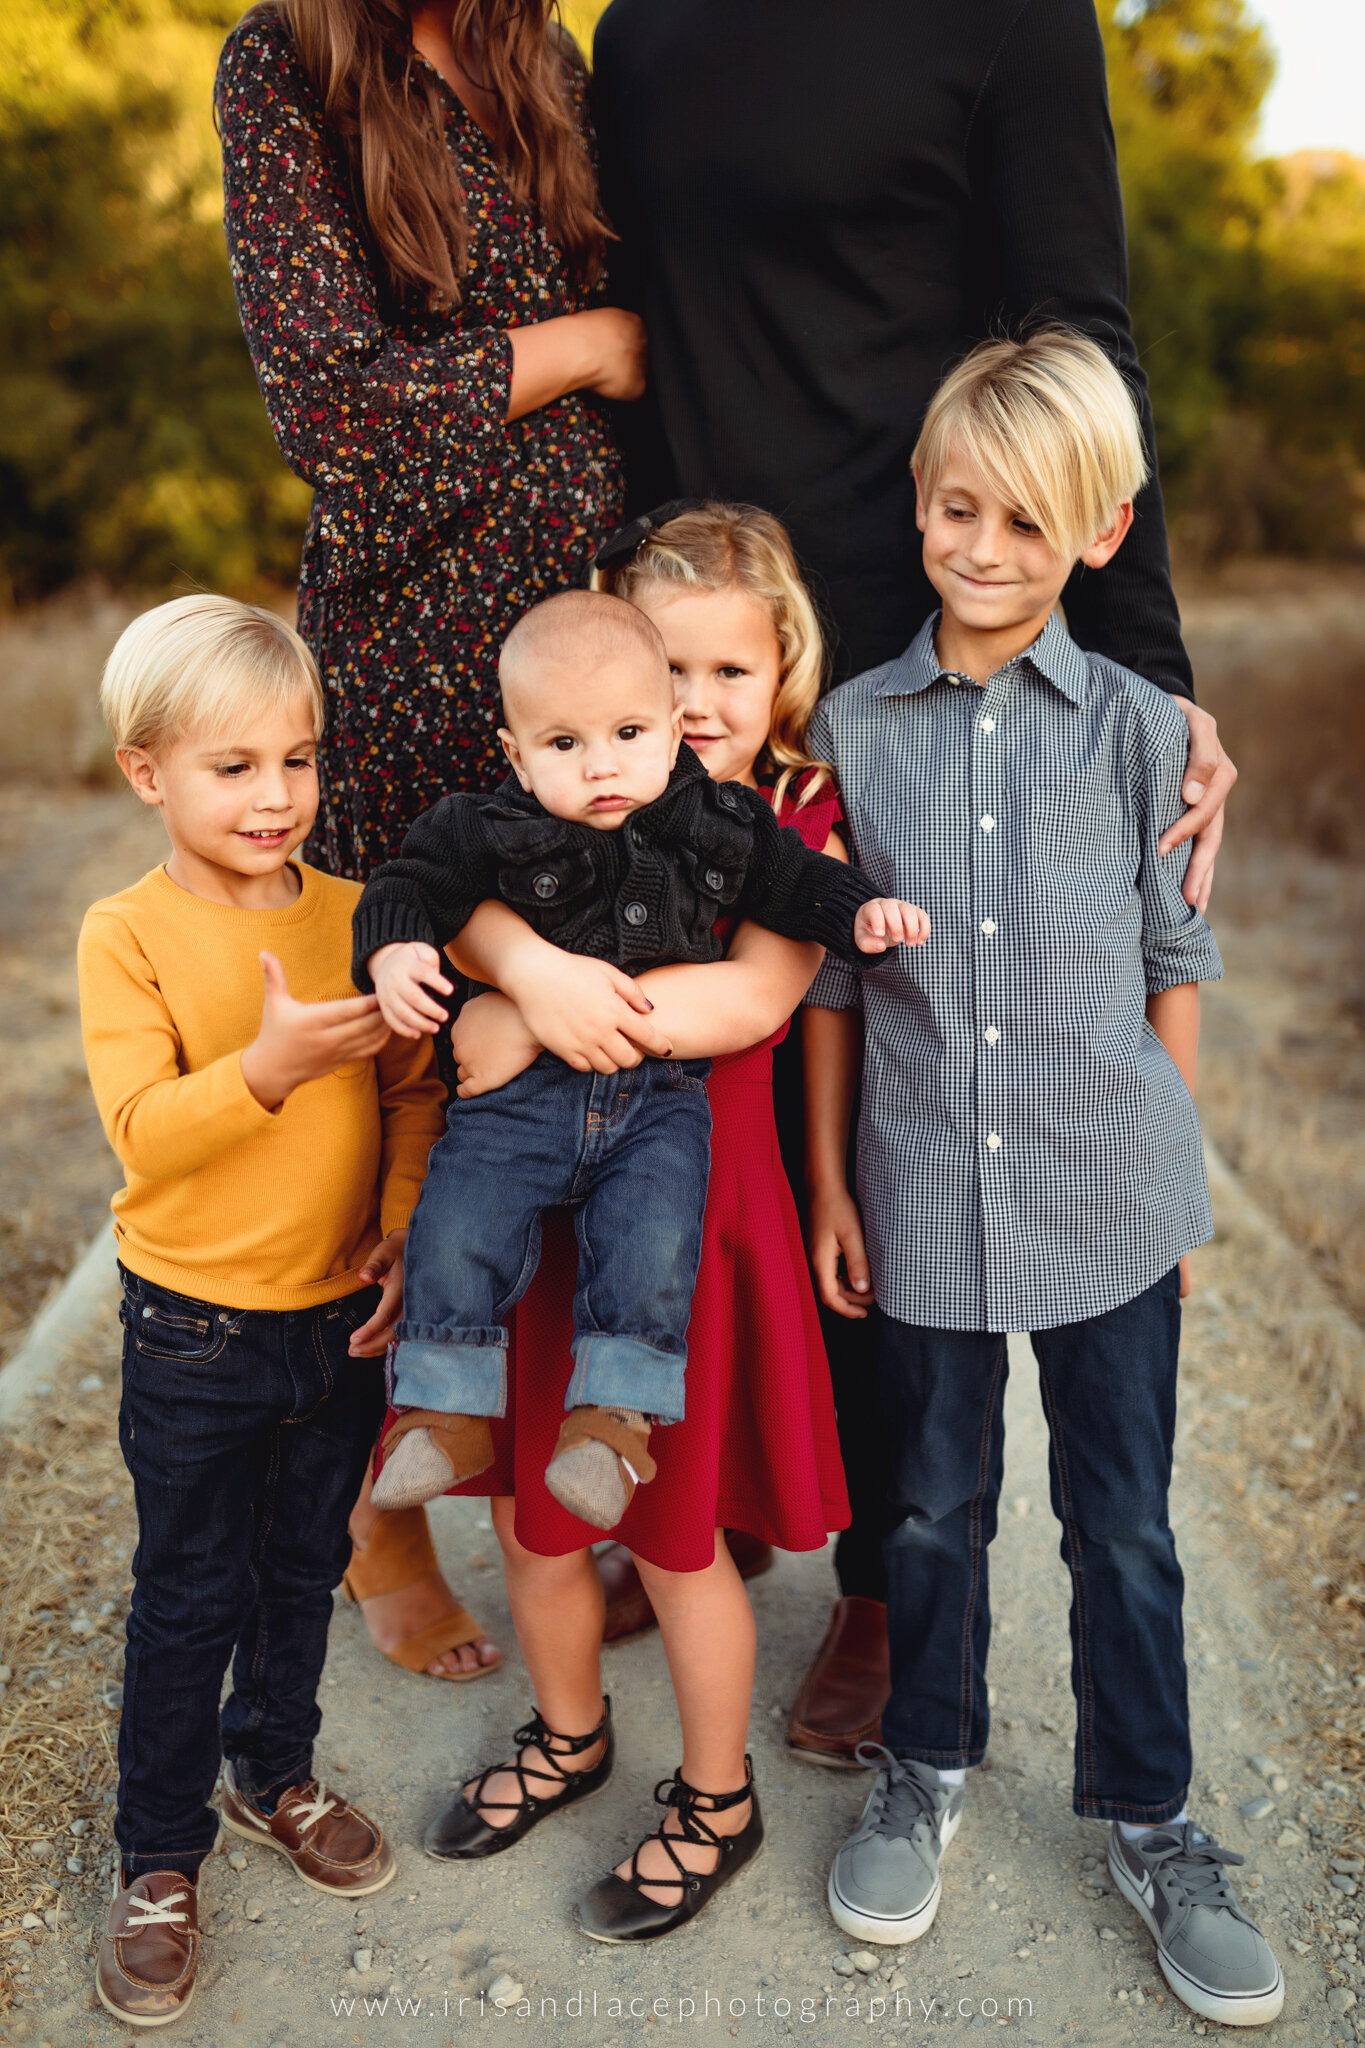 Top Bay Area Family Photographers | Boho Outdoor Unposed Authentic Family Photos in Silicon Valley  |  Iris and Lace Photography